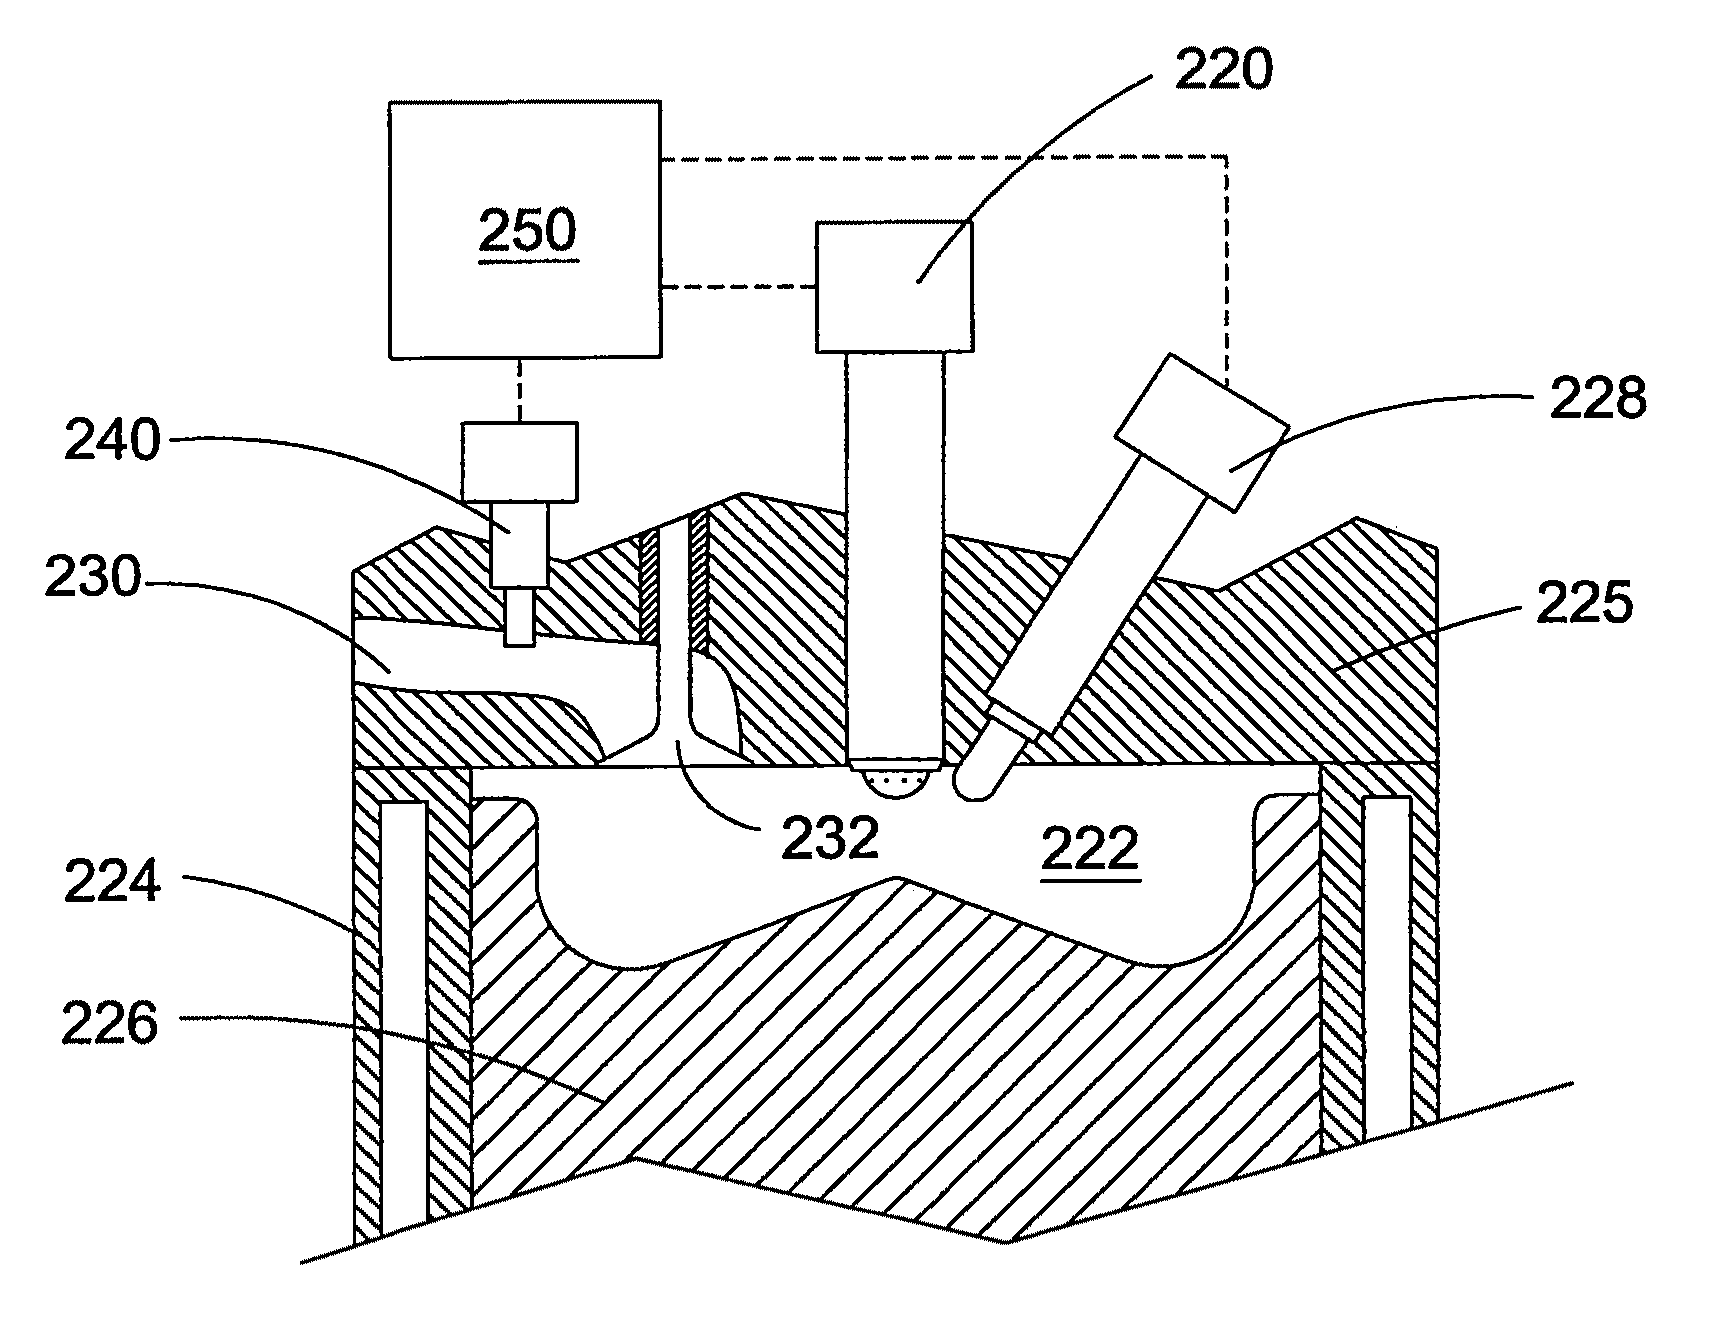 Method and apparatus of fuelling an internal combustion engine with hydrogen and methane